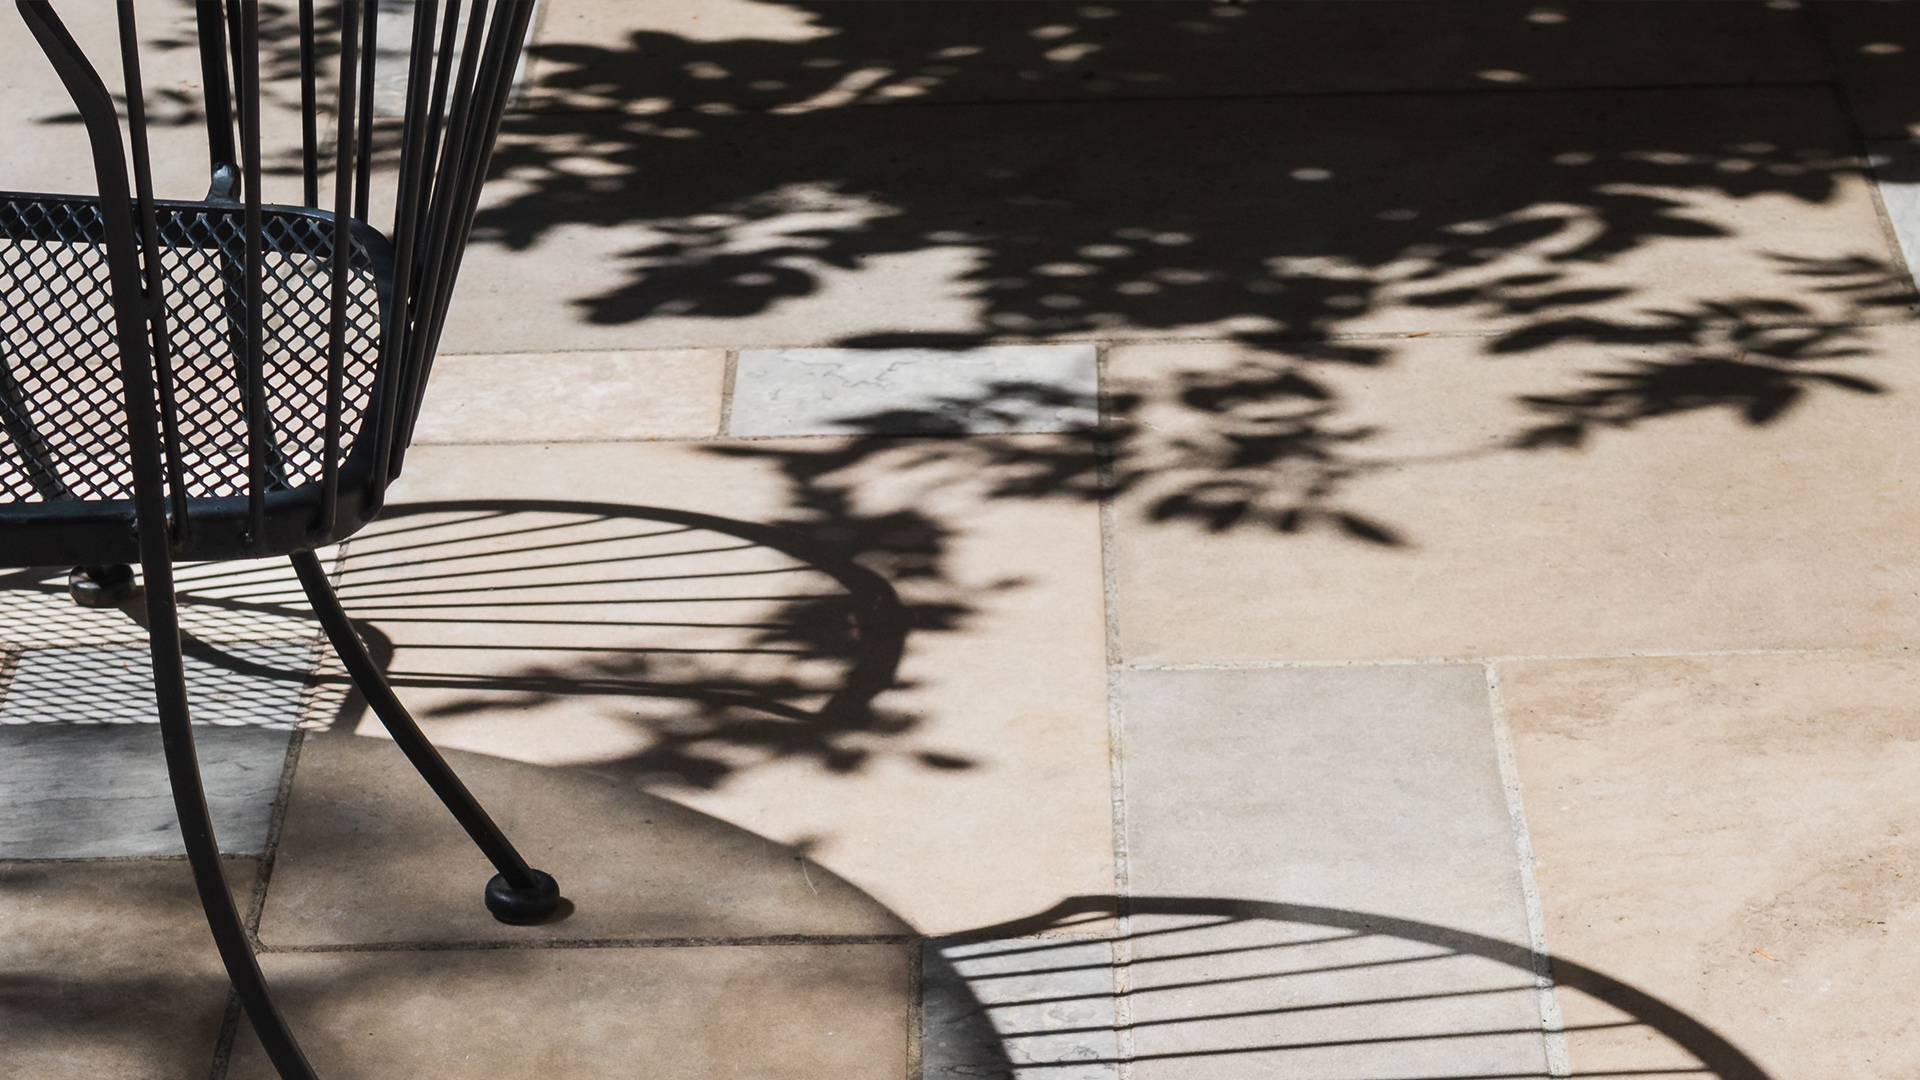 Landscaping Toronto - Patterned shadows of leaves fall onto a natural stone patio floor, intersecting with the shadow of a metal chair in bright sunlight.